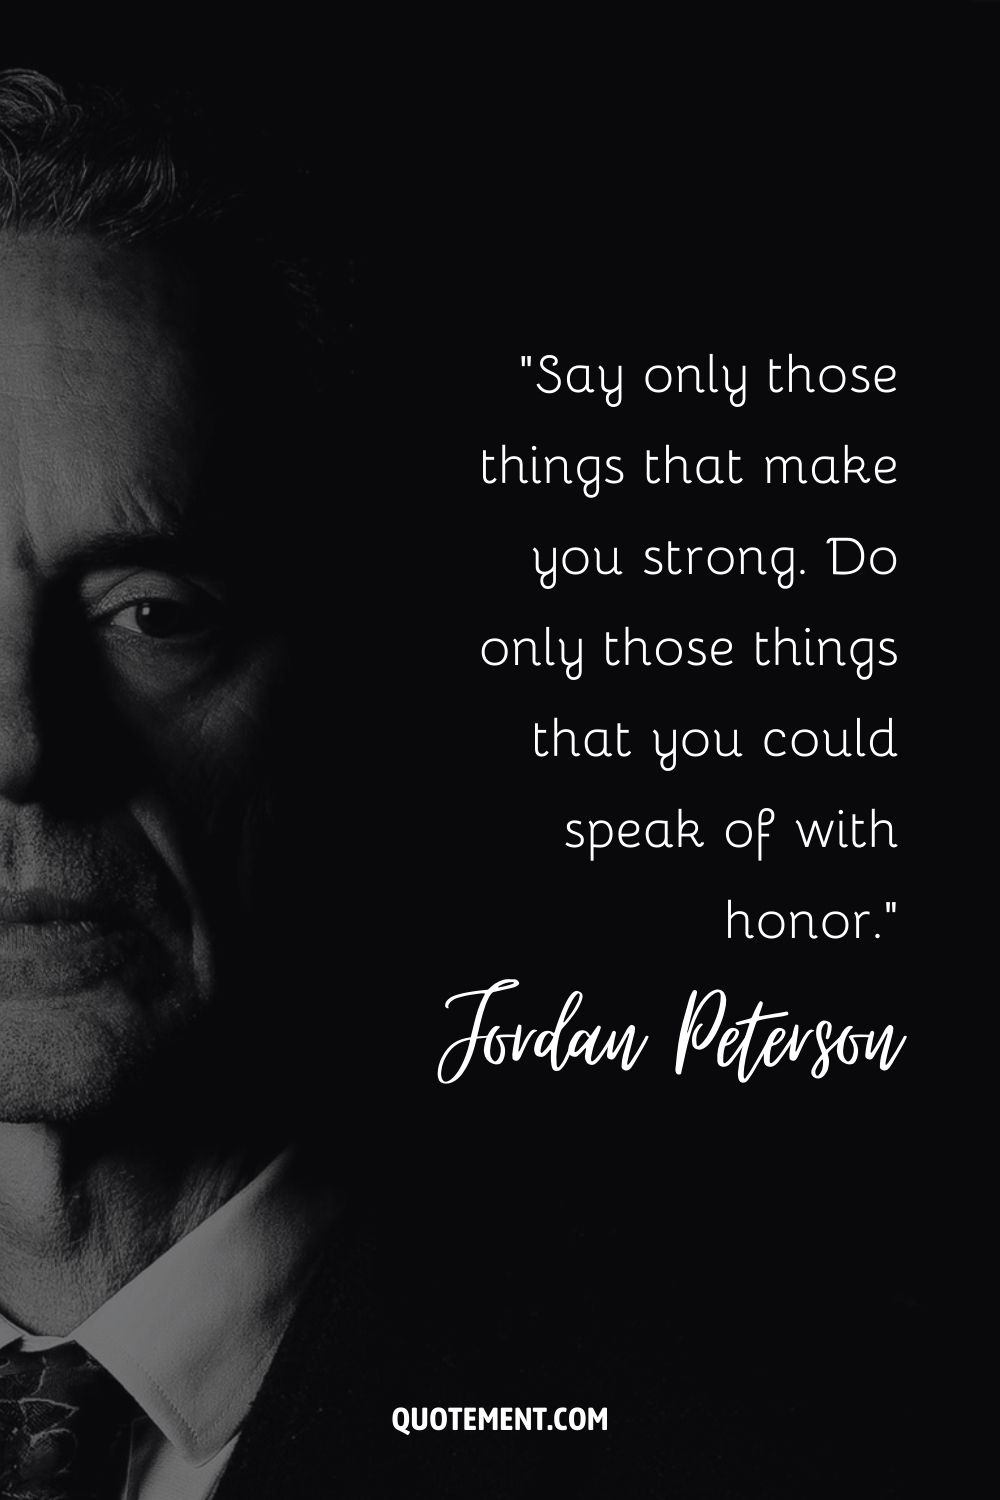 Say only those things that make you strong. Do only those things that you could speak of with honor